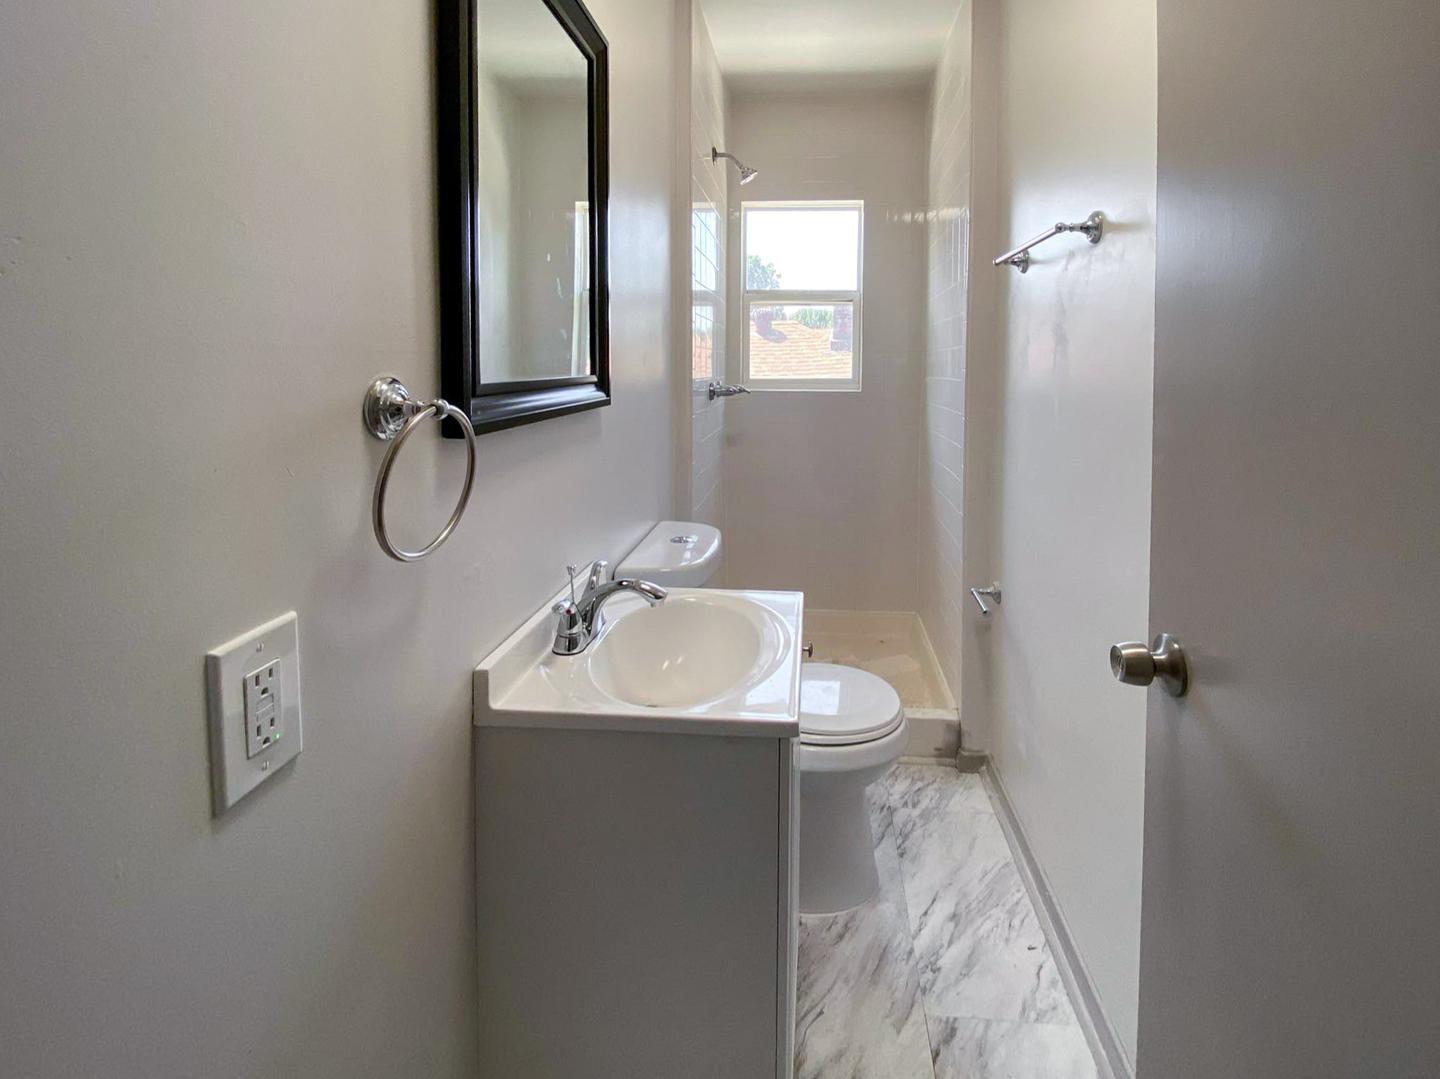 Upstairs bathroom which has been fully updated with all new everything!